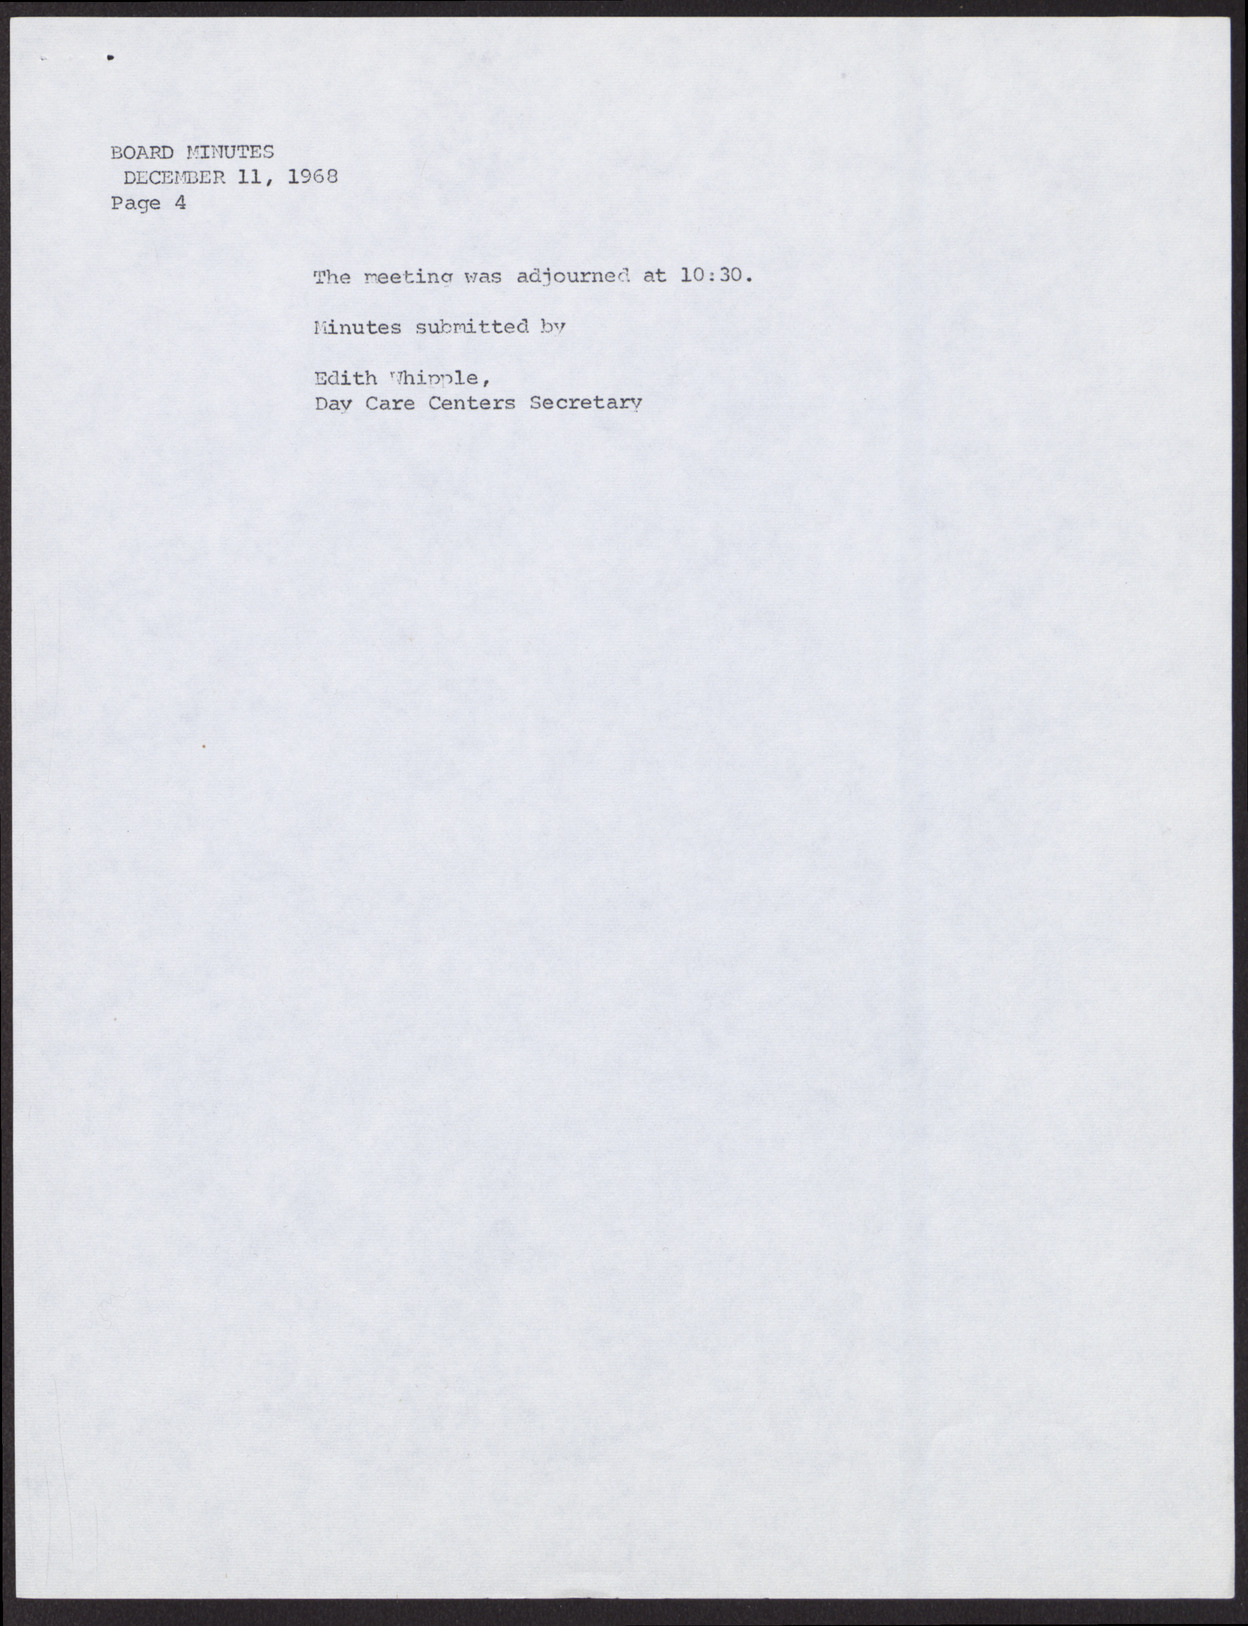 Minutes from Operation Independence meeting (4 pages), December 11, 1968, page 4